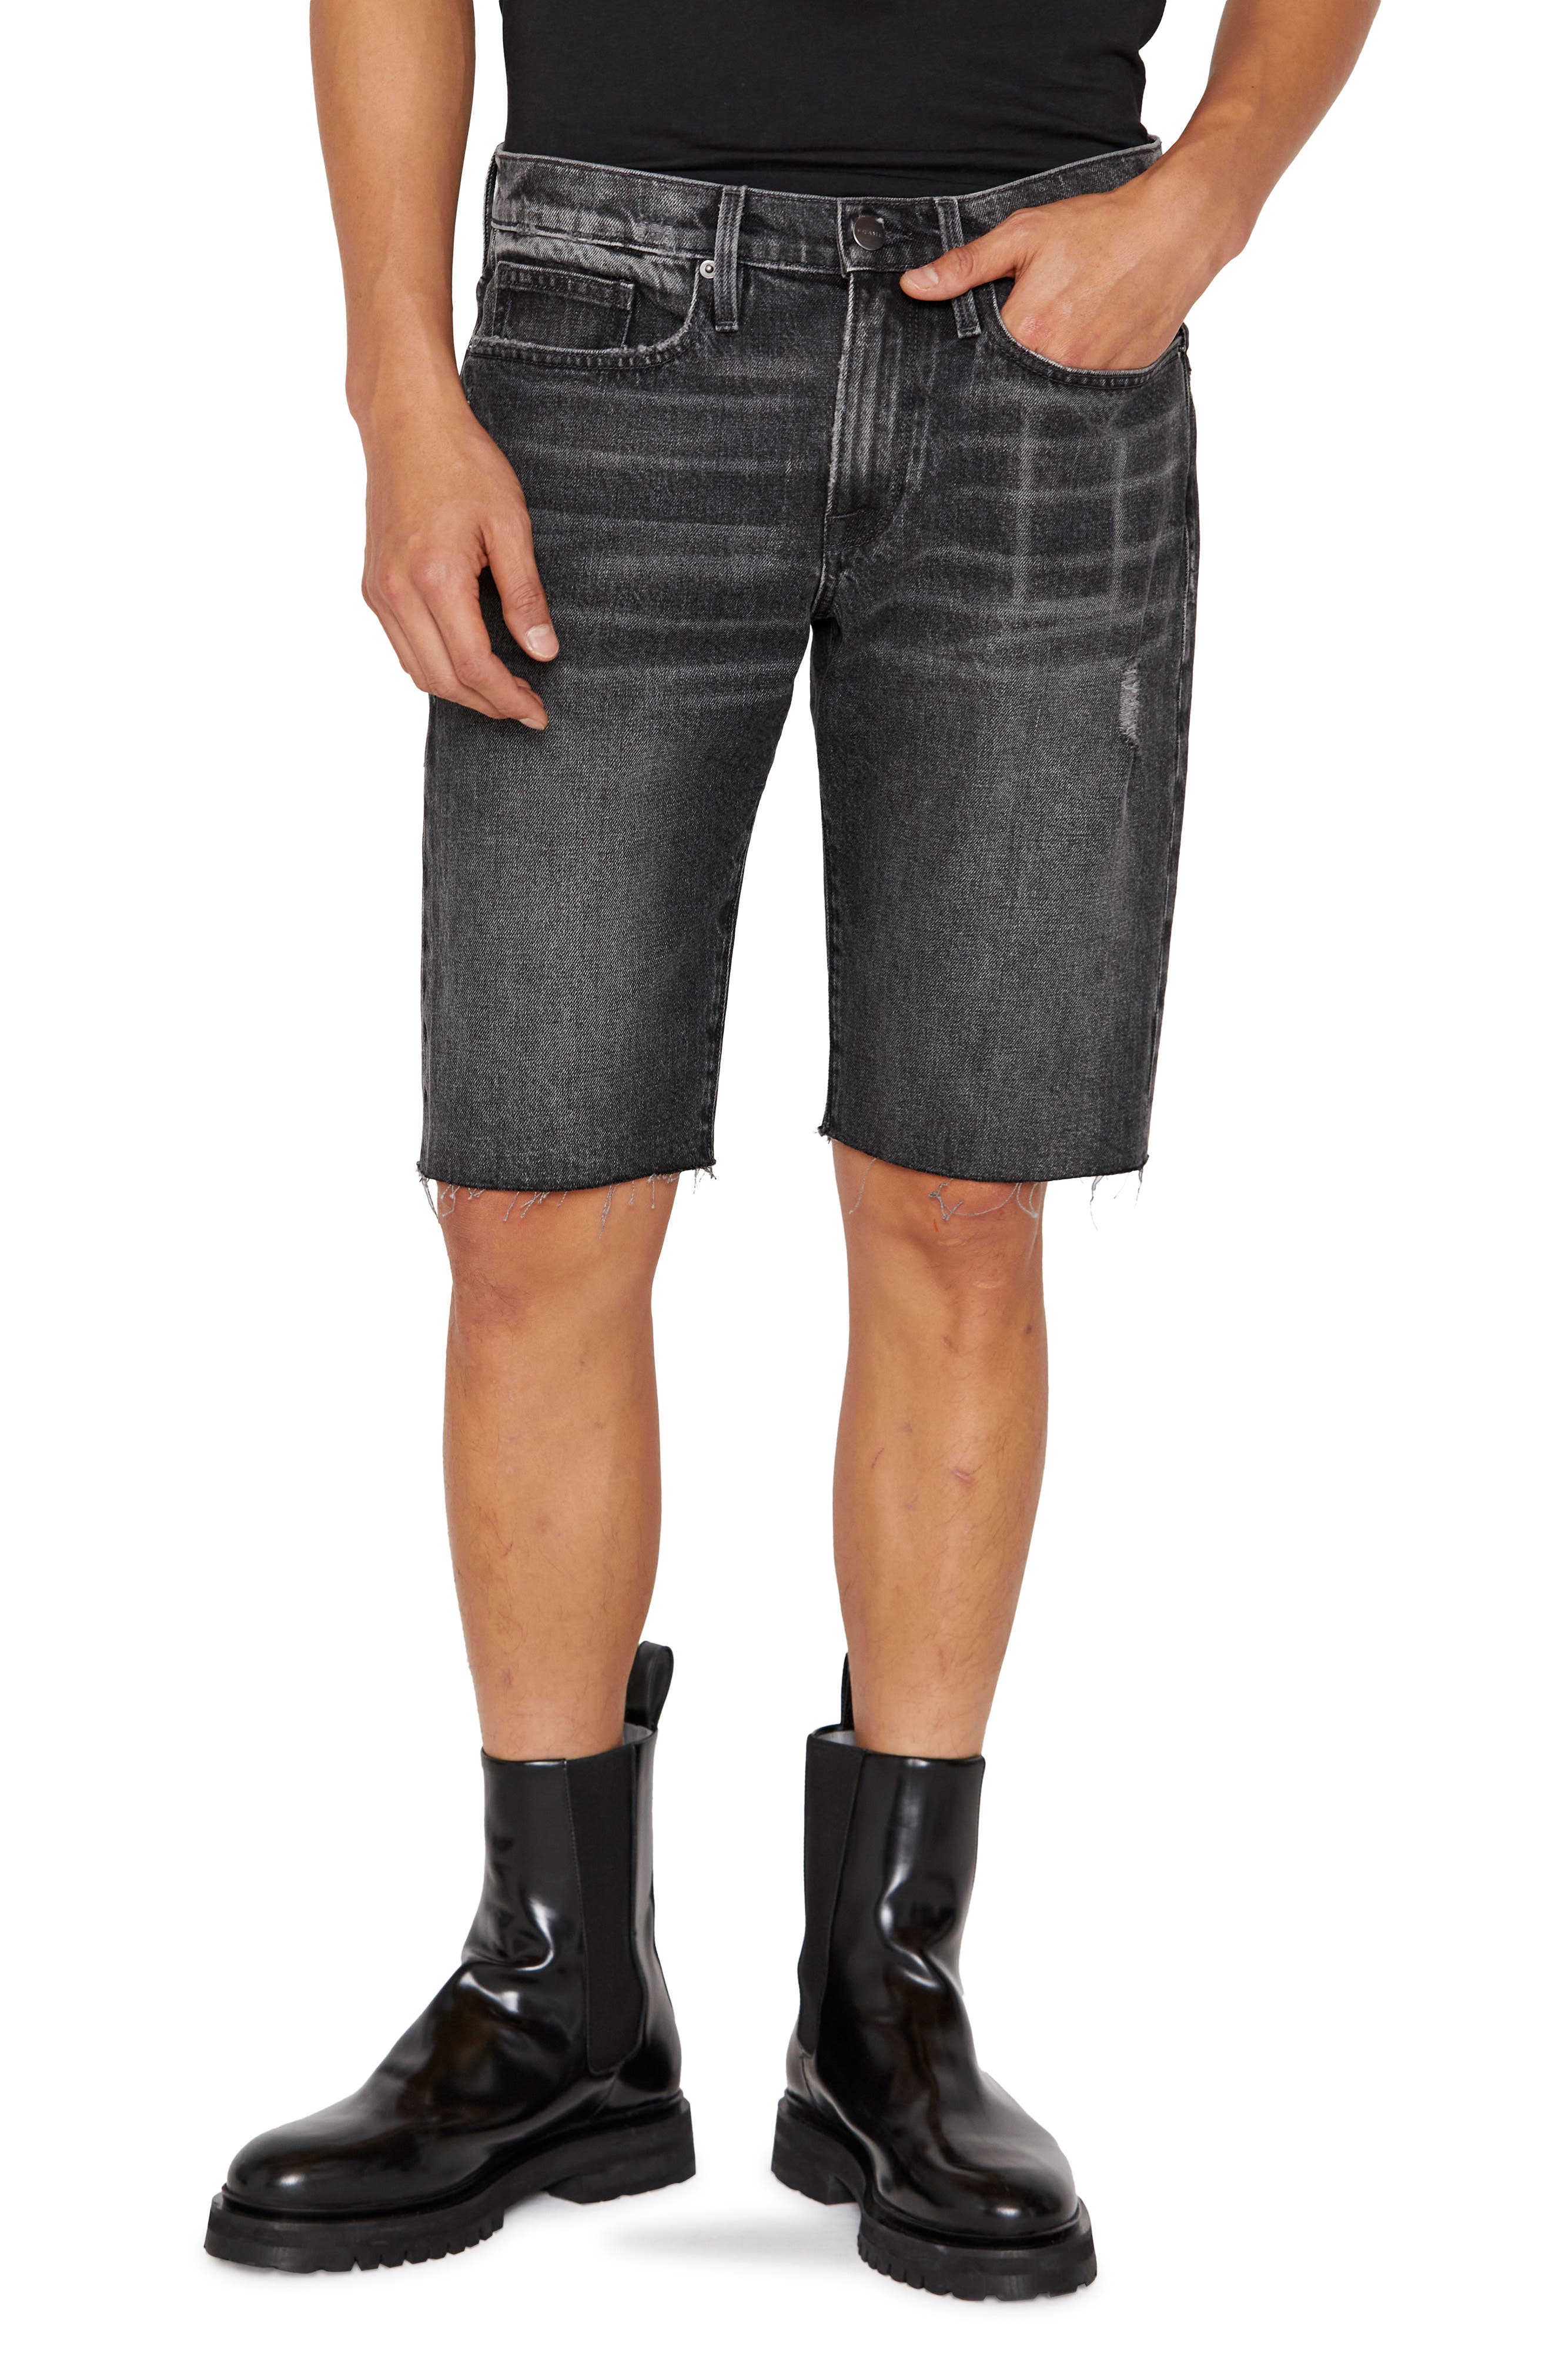 FRAME L'Homme Cutoff Denim Shorts in Charlock Rips at Nordstrom, Size 30